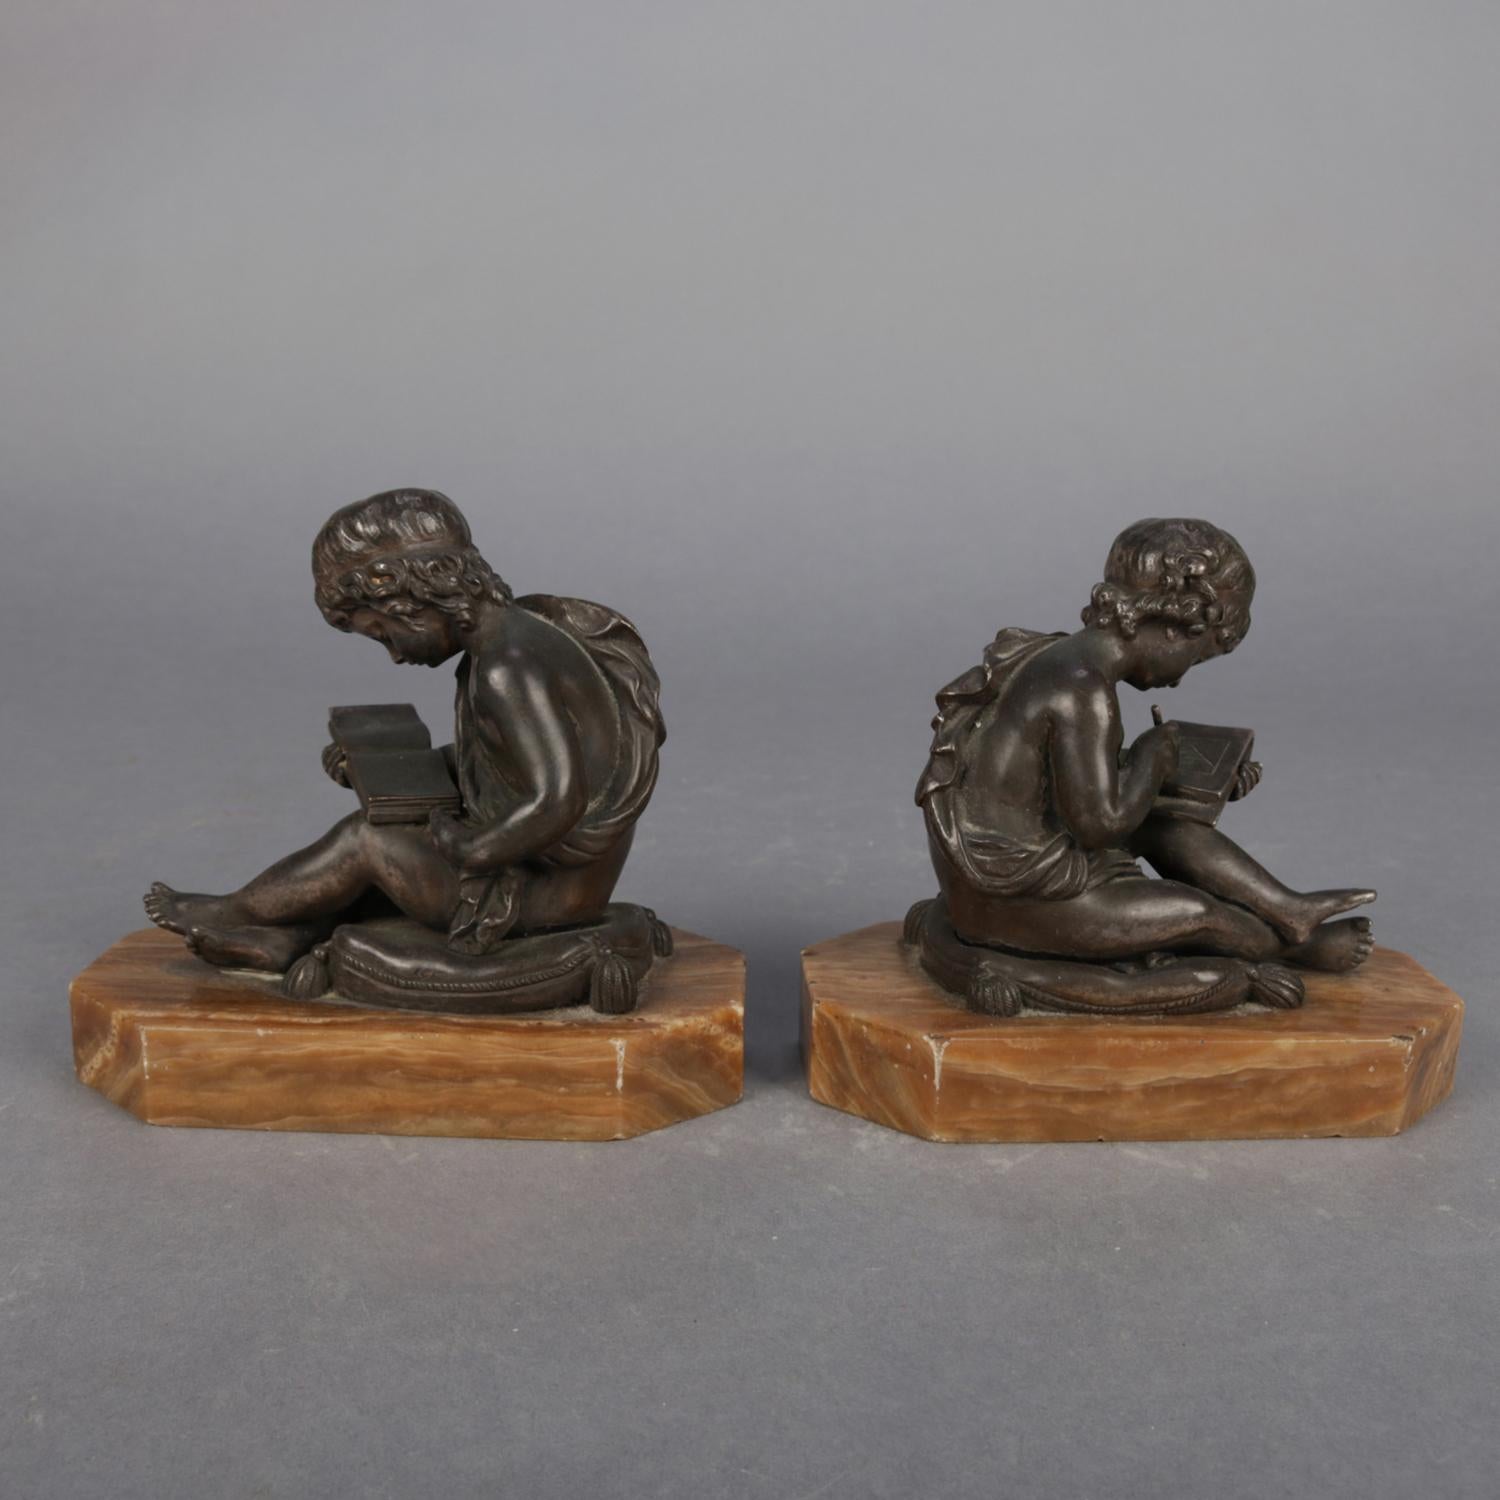 20th Century Antique French Bronze Sculpture Bookends after Charles Lemire, circa 1910